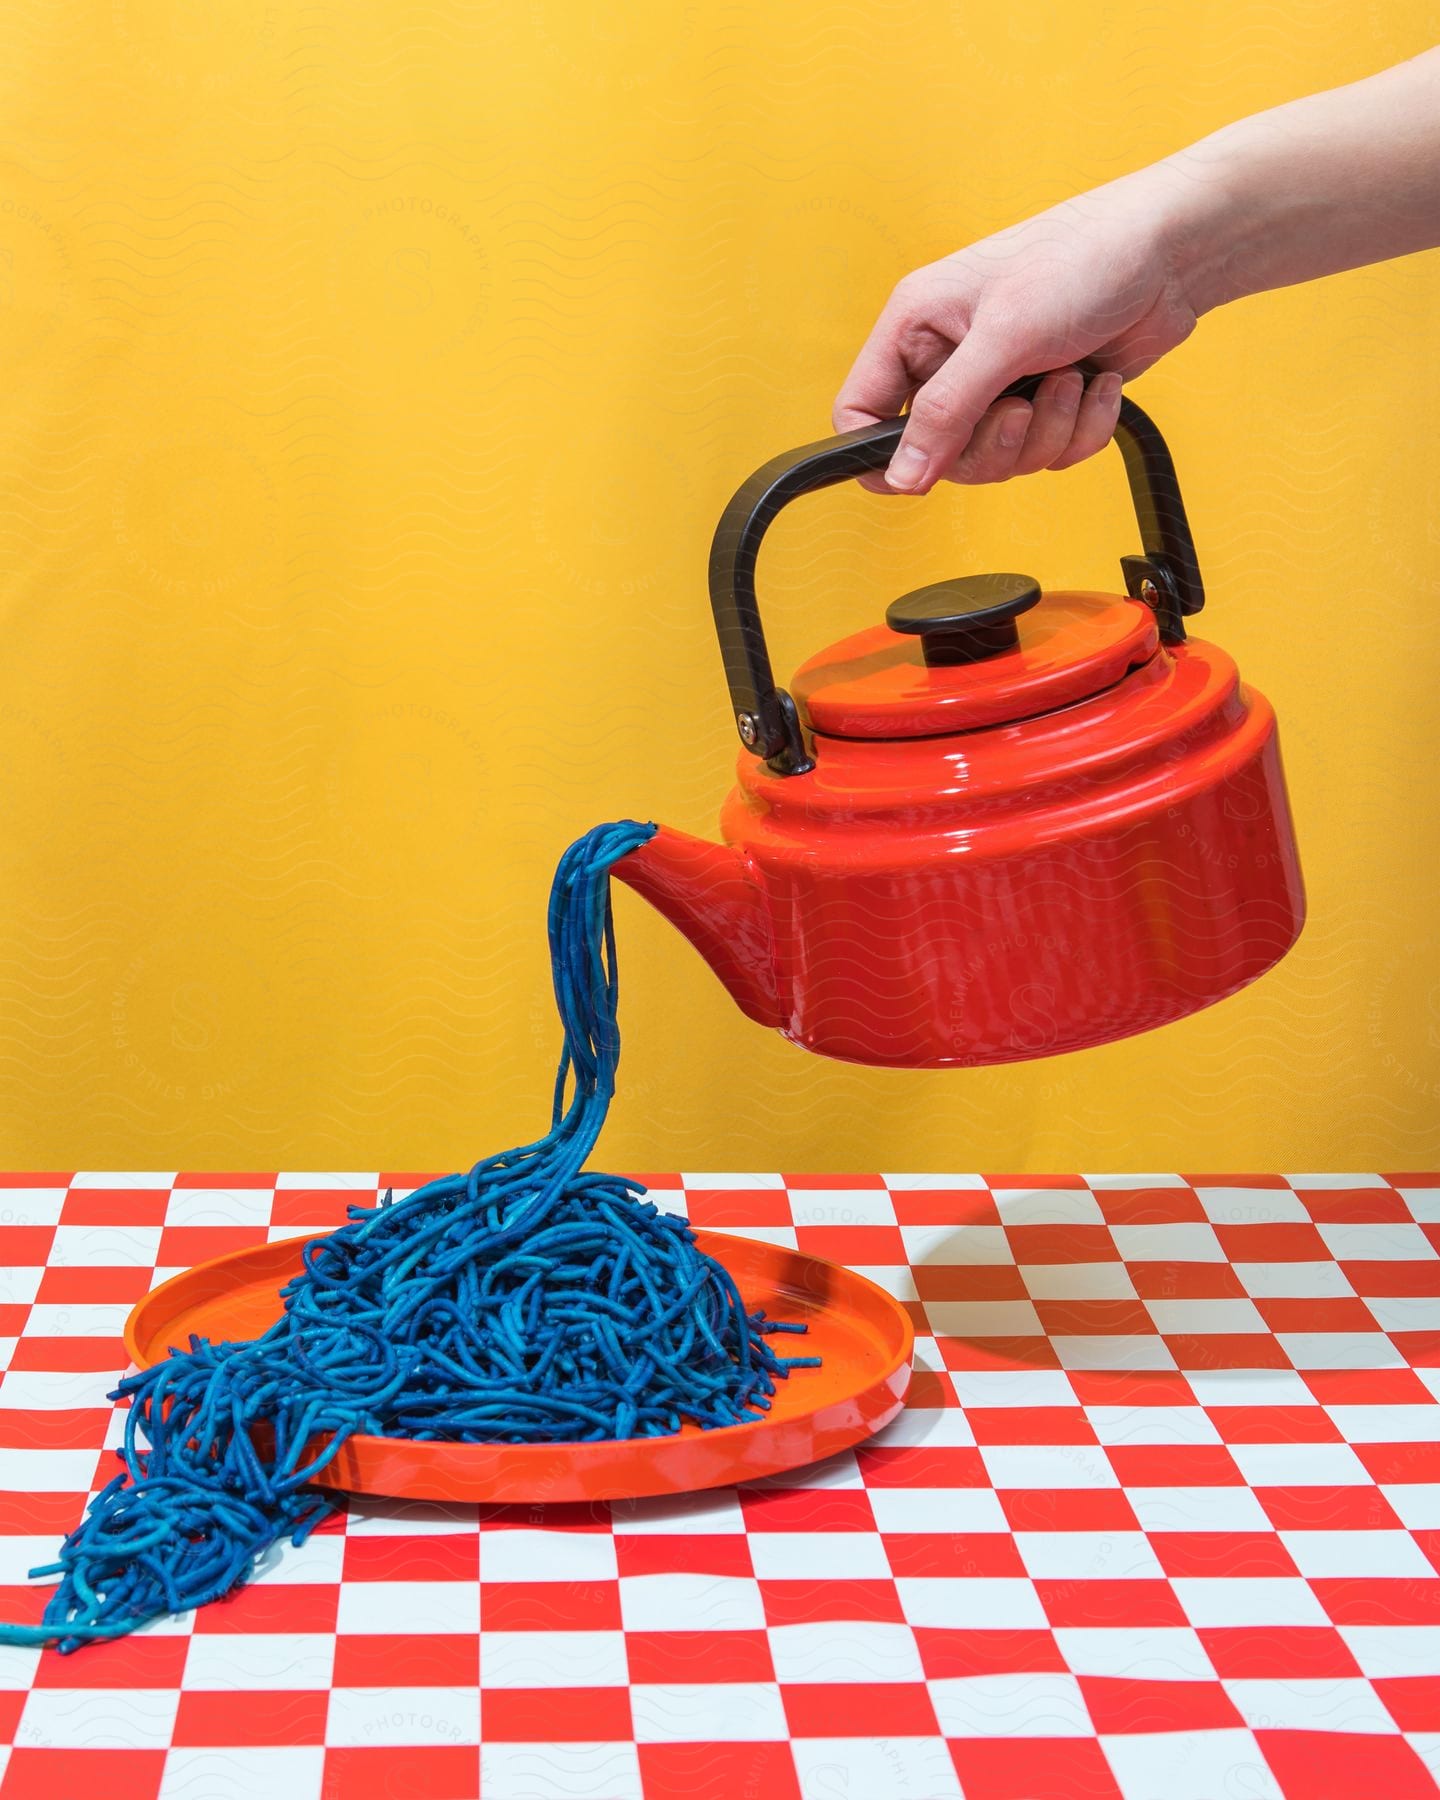 Human hand holding a vintage red kettle pouring abstract blue strands of dough.